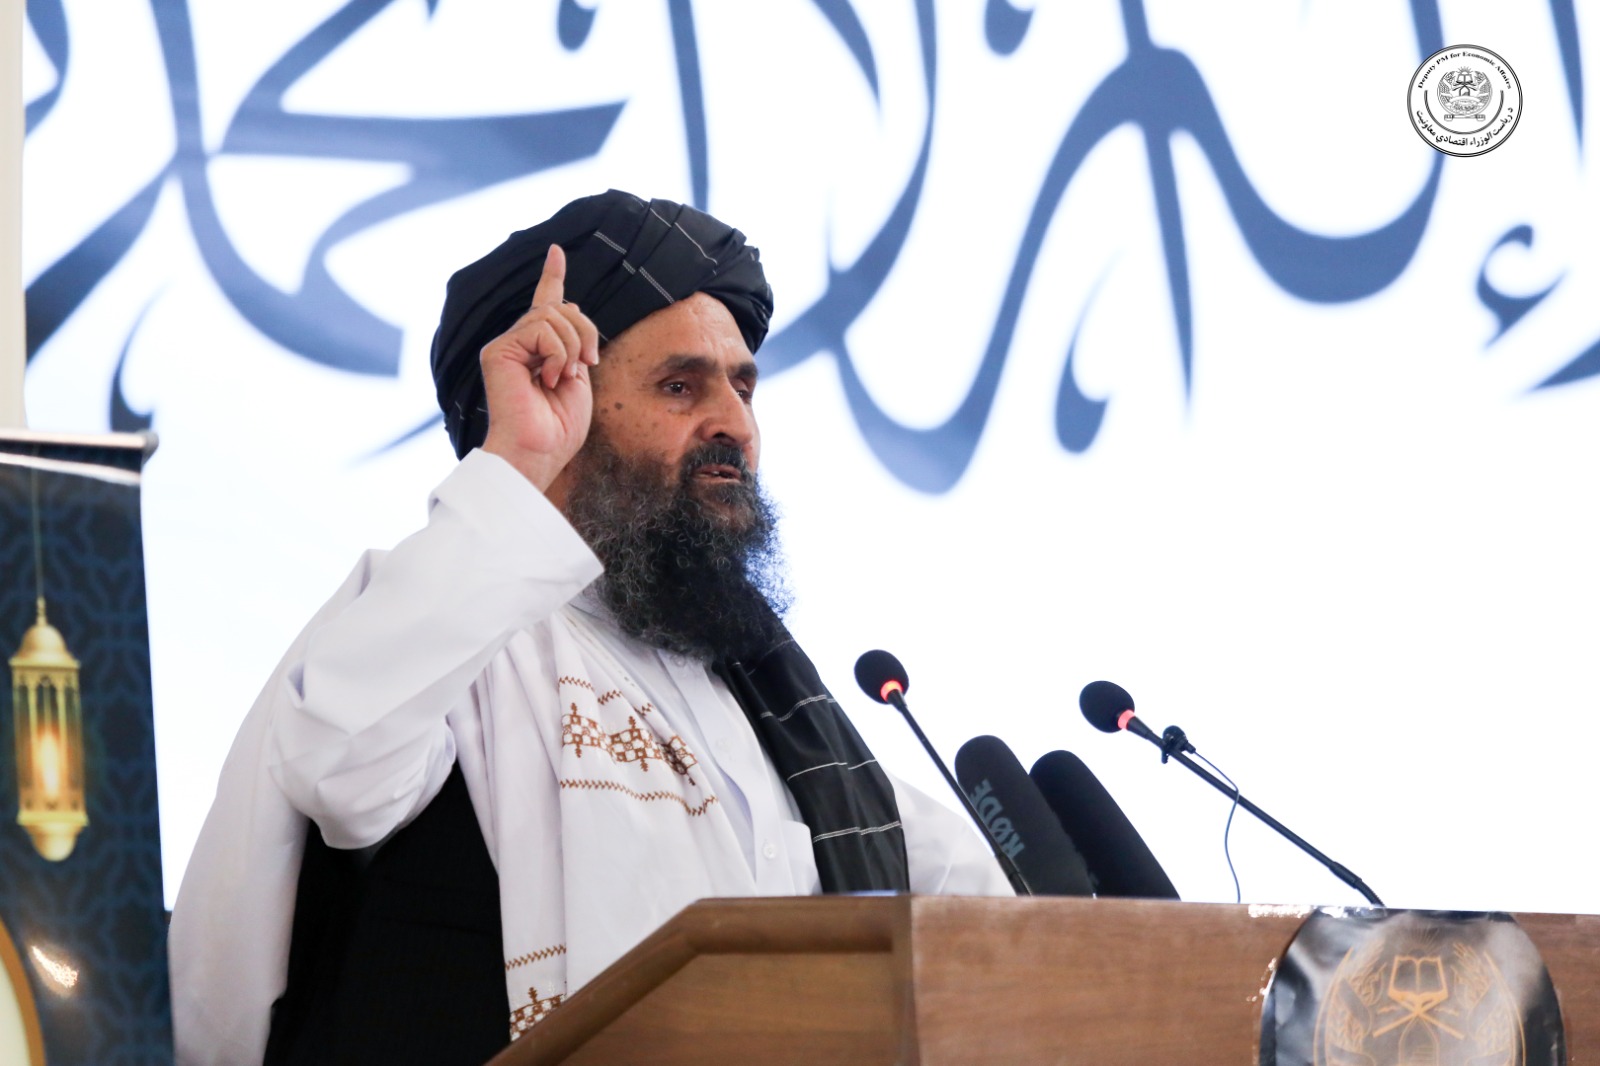 Mullah Abdul Ghani Baradar Akhund, the Deputy Prime Minister for Economic Affairs of the Islamic Emirate of Afghanistan, addressed the ceremony commemorating the third anniversary of the agreement made with the United States in Doha.